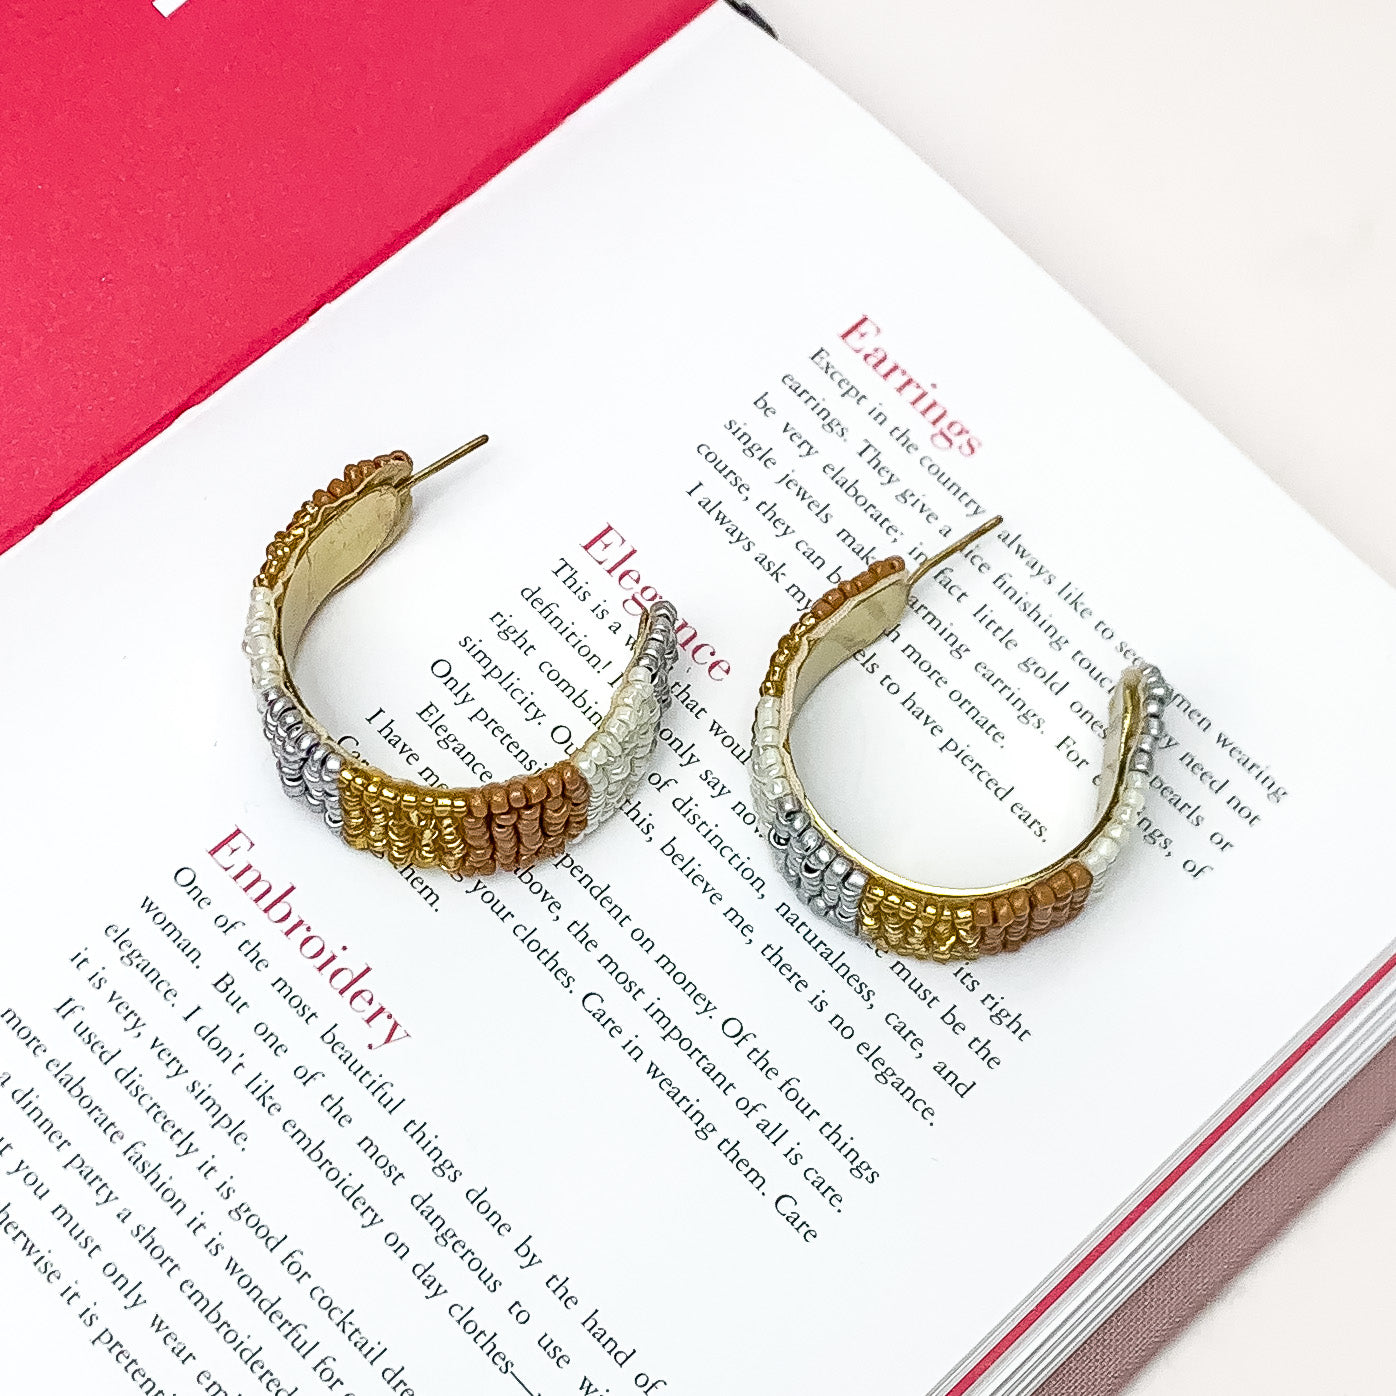 Vacay Era Gold Tone Beaded Hoop Earrings in Neutral Tones - Giddy Up Glamour Boutique